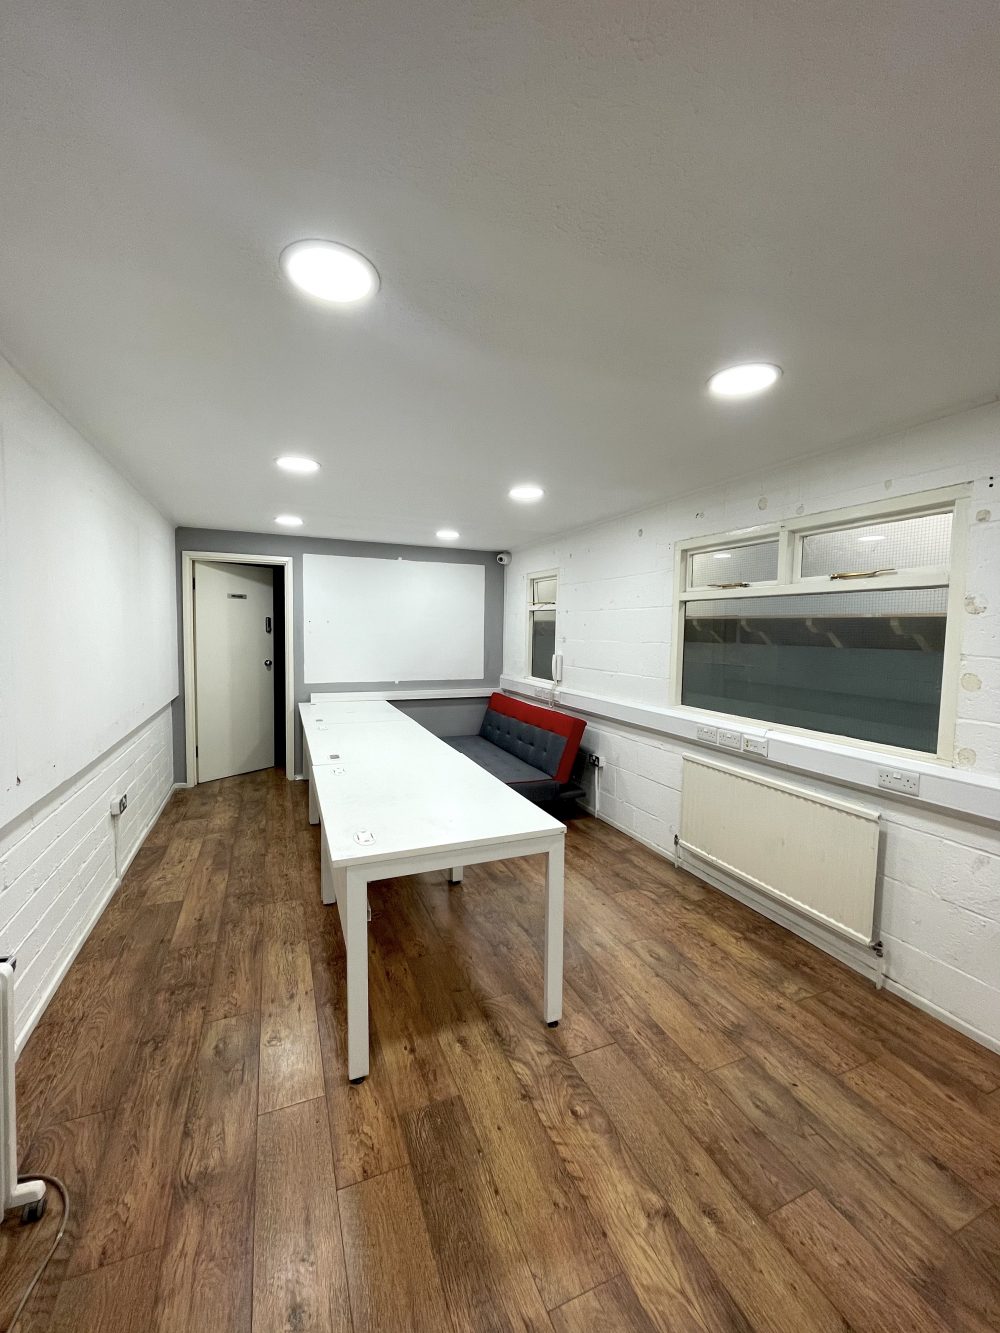 N15 Seven Sisters (High Cross, Fountayne Road) – Live work style Warehouse Unit to rent for artists 19